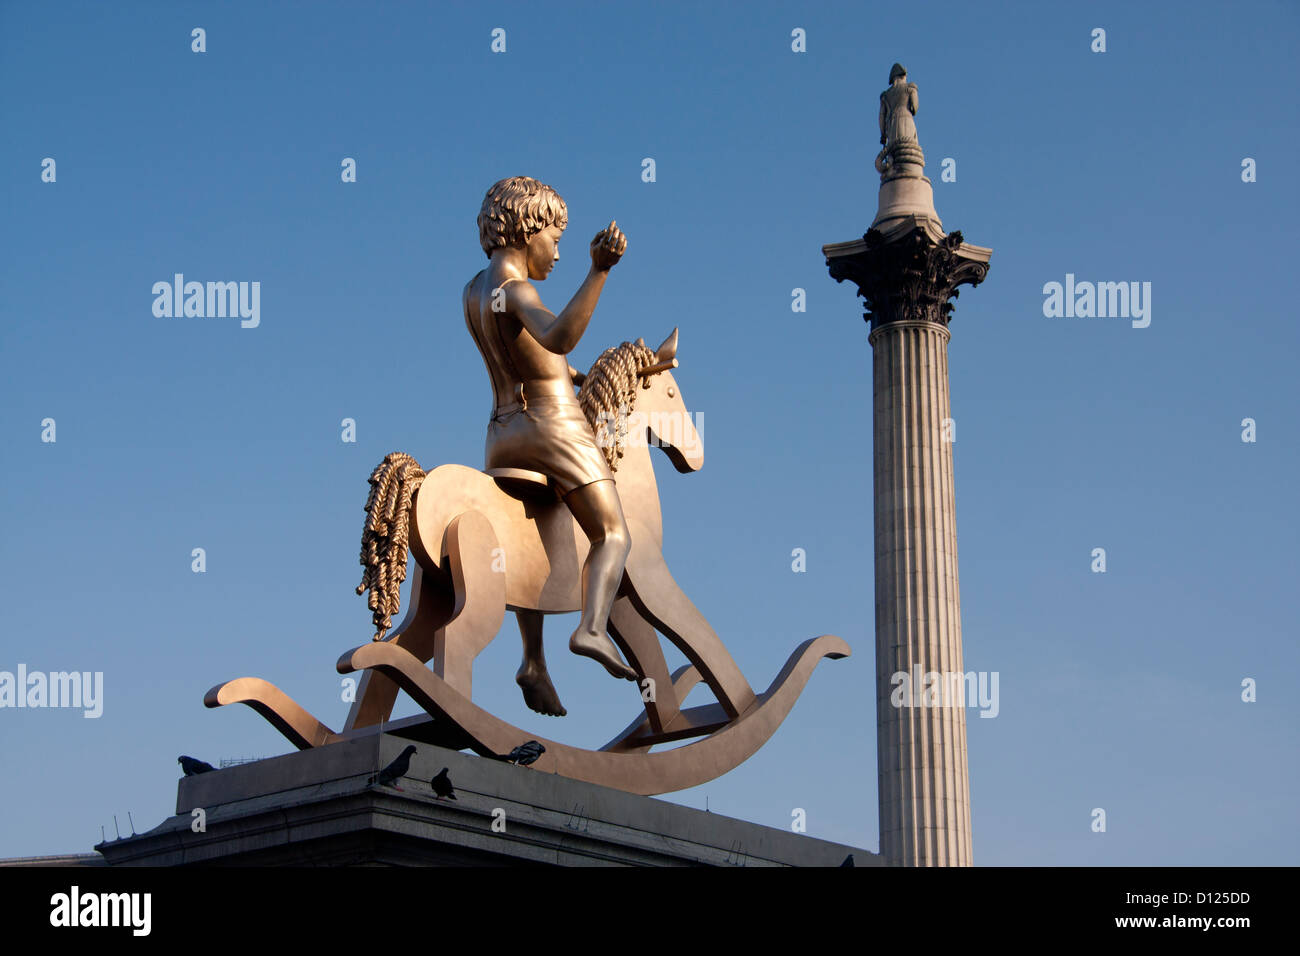 Child on rocking horse sculpture - Powerless Structures Fig 101 - on Fourth Plinth at Trafalgar Square London England UK Stock Photo